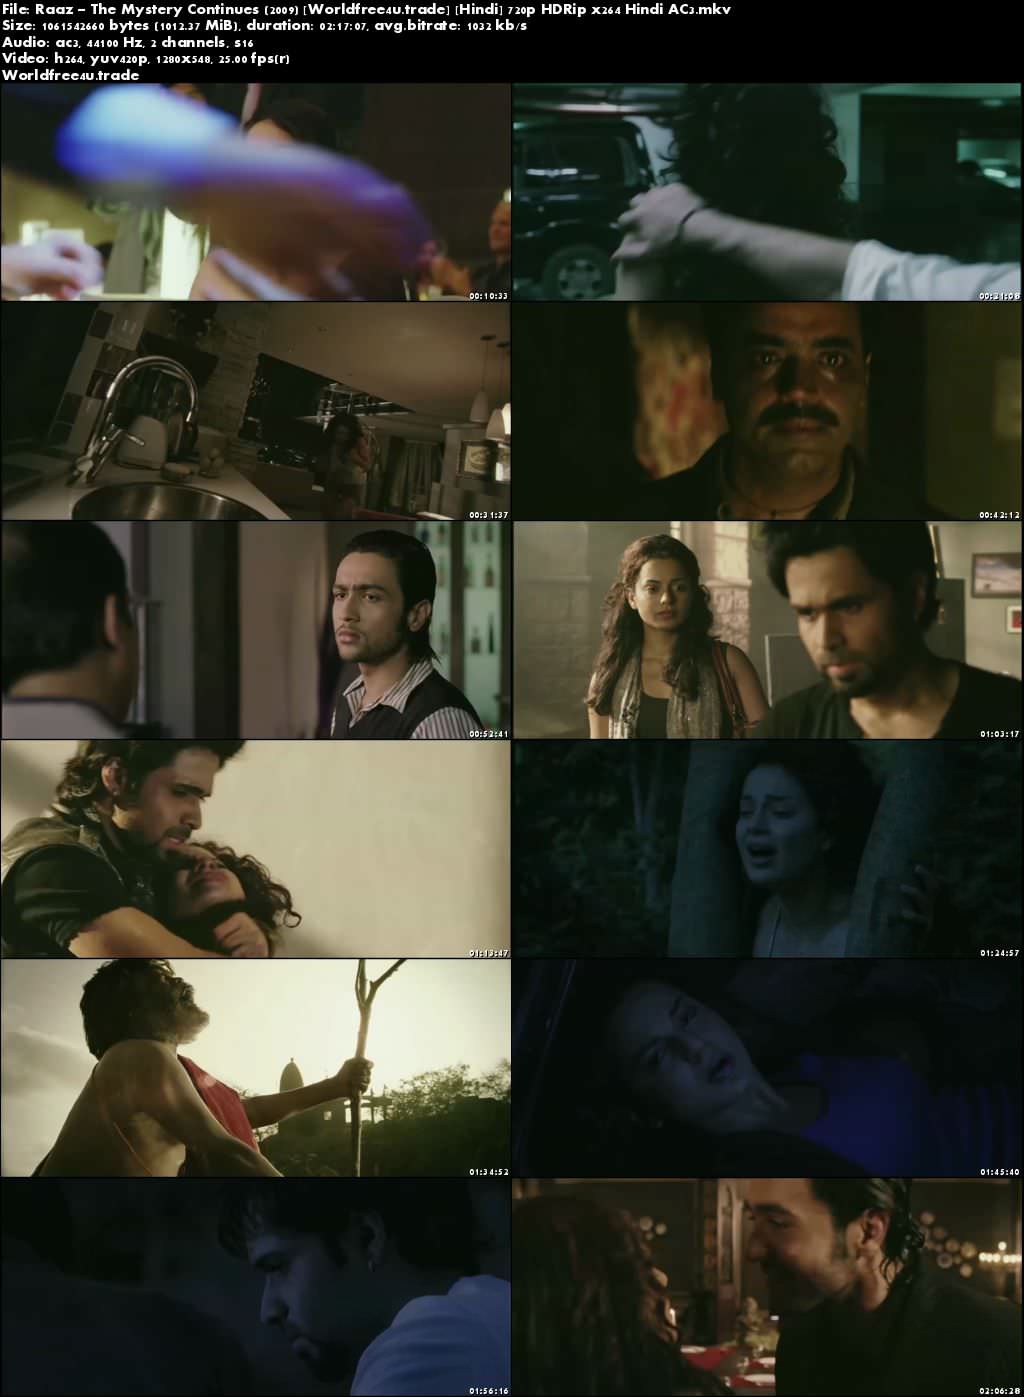 Raaz - The Mystery Continues Free Movie Download Utorrent Free